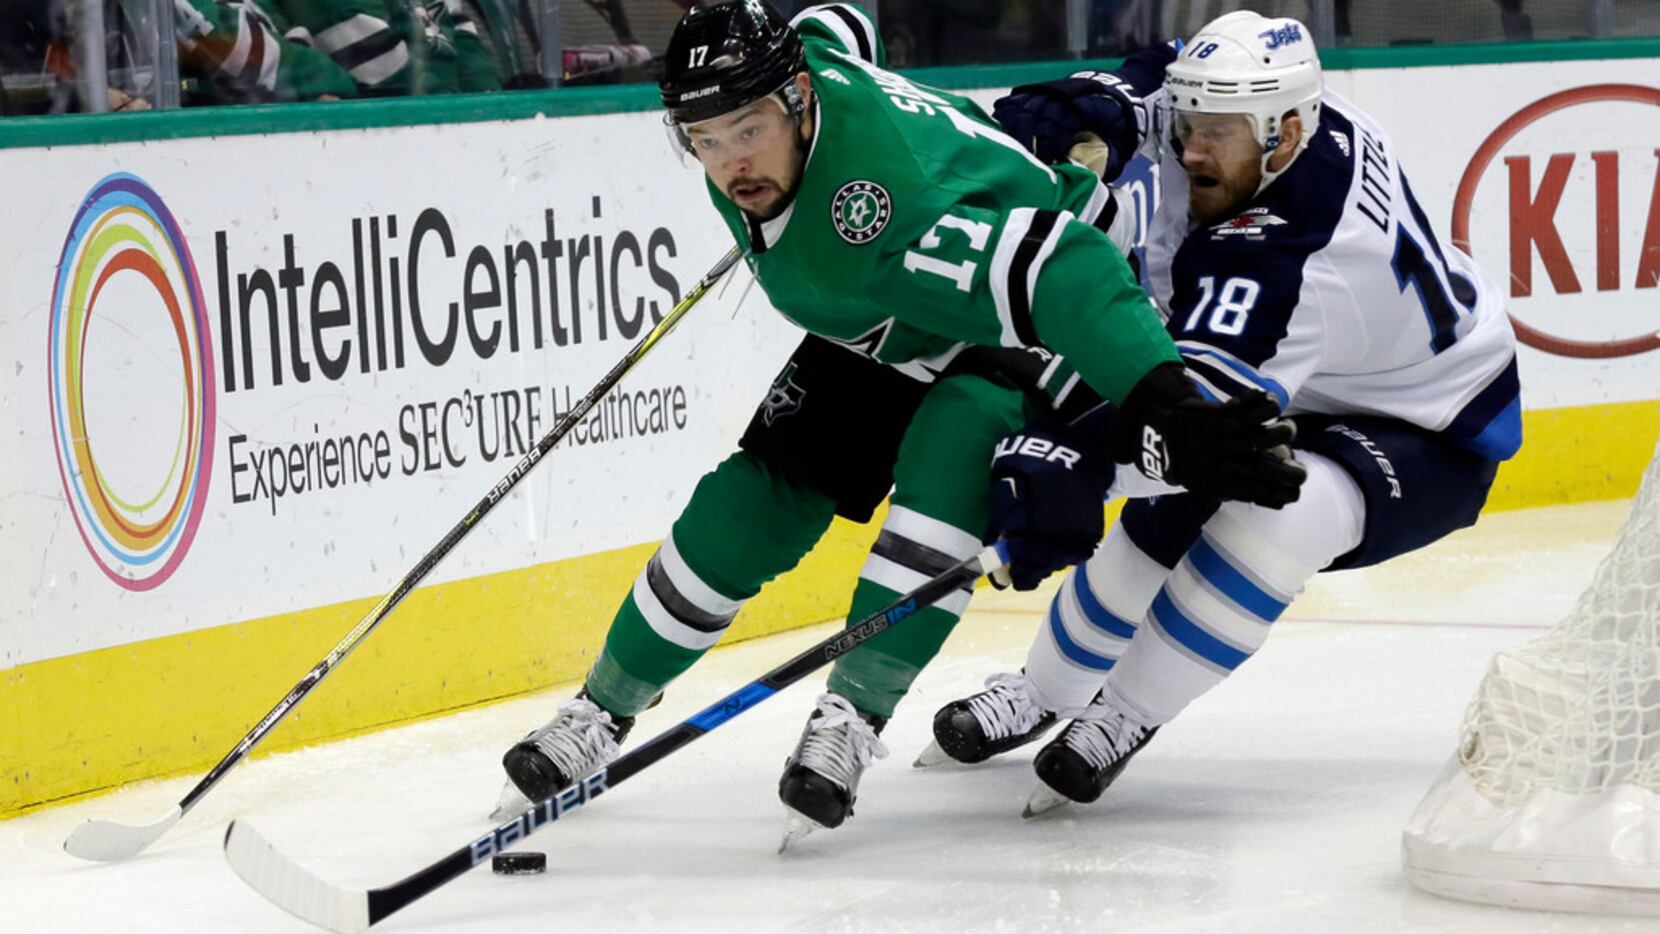 It's embarrassing': Stars again can't find answer against Winnipeg